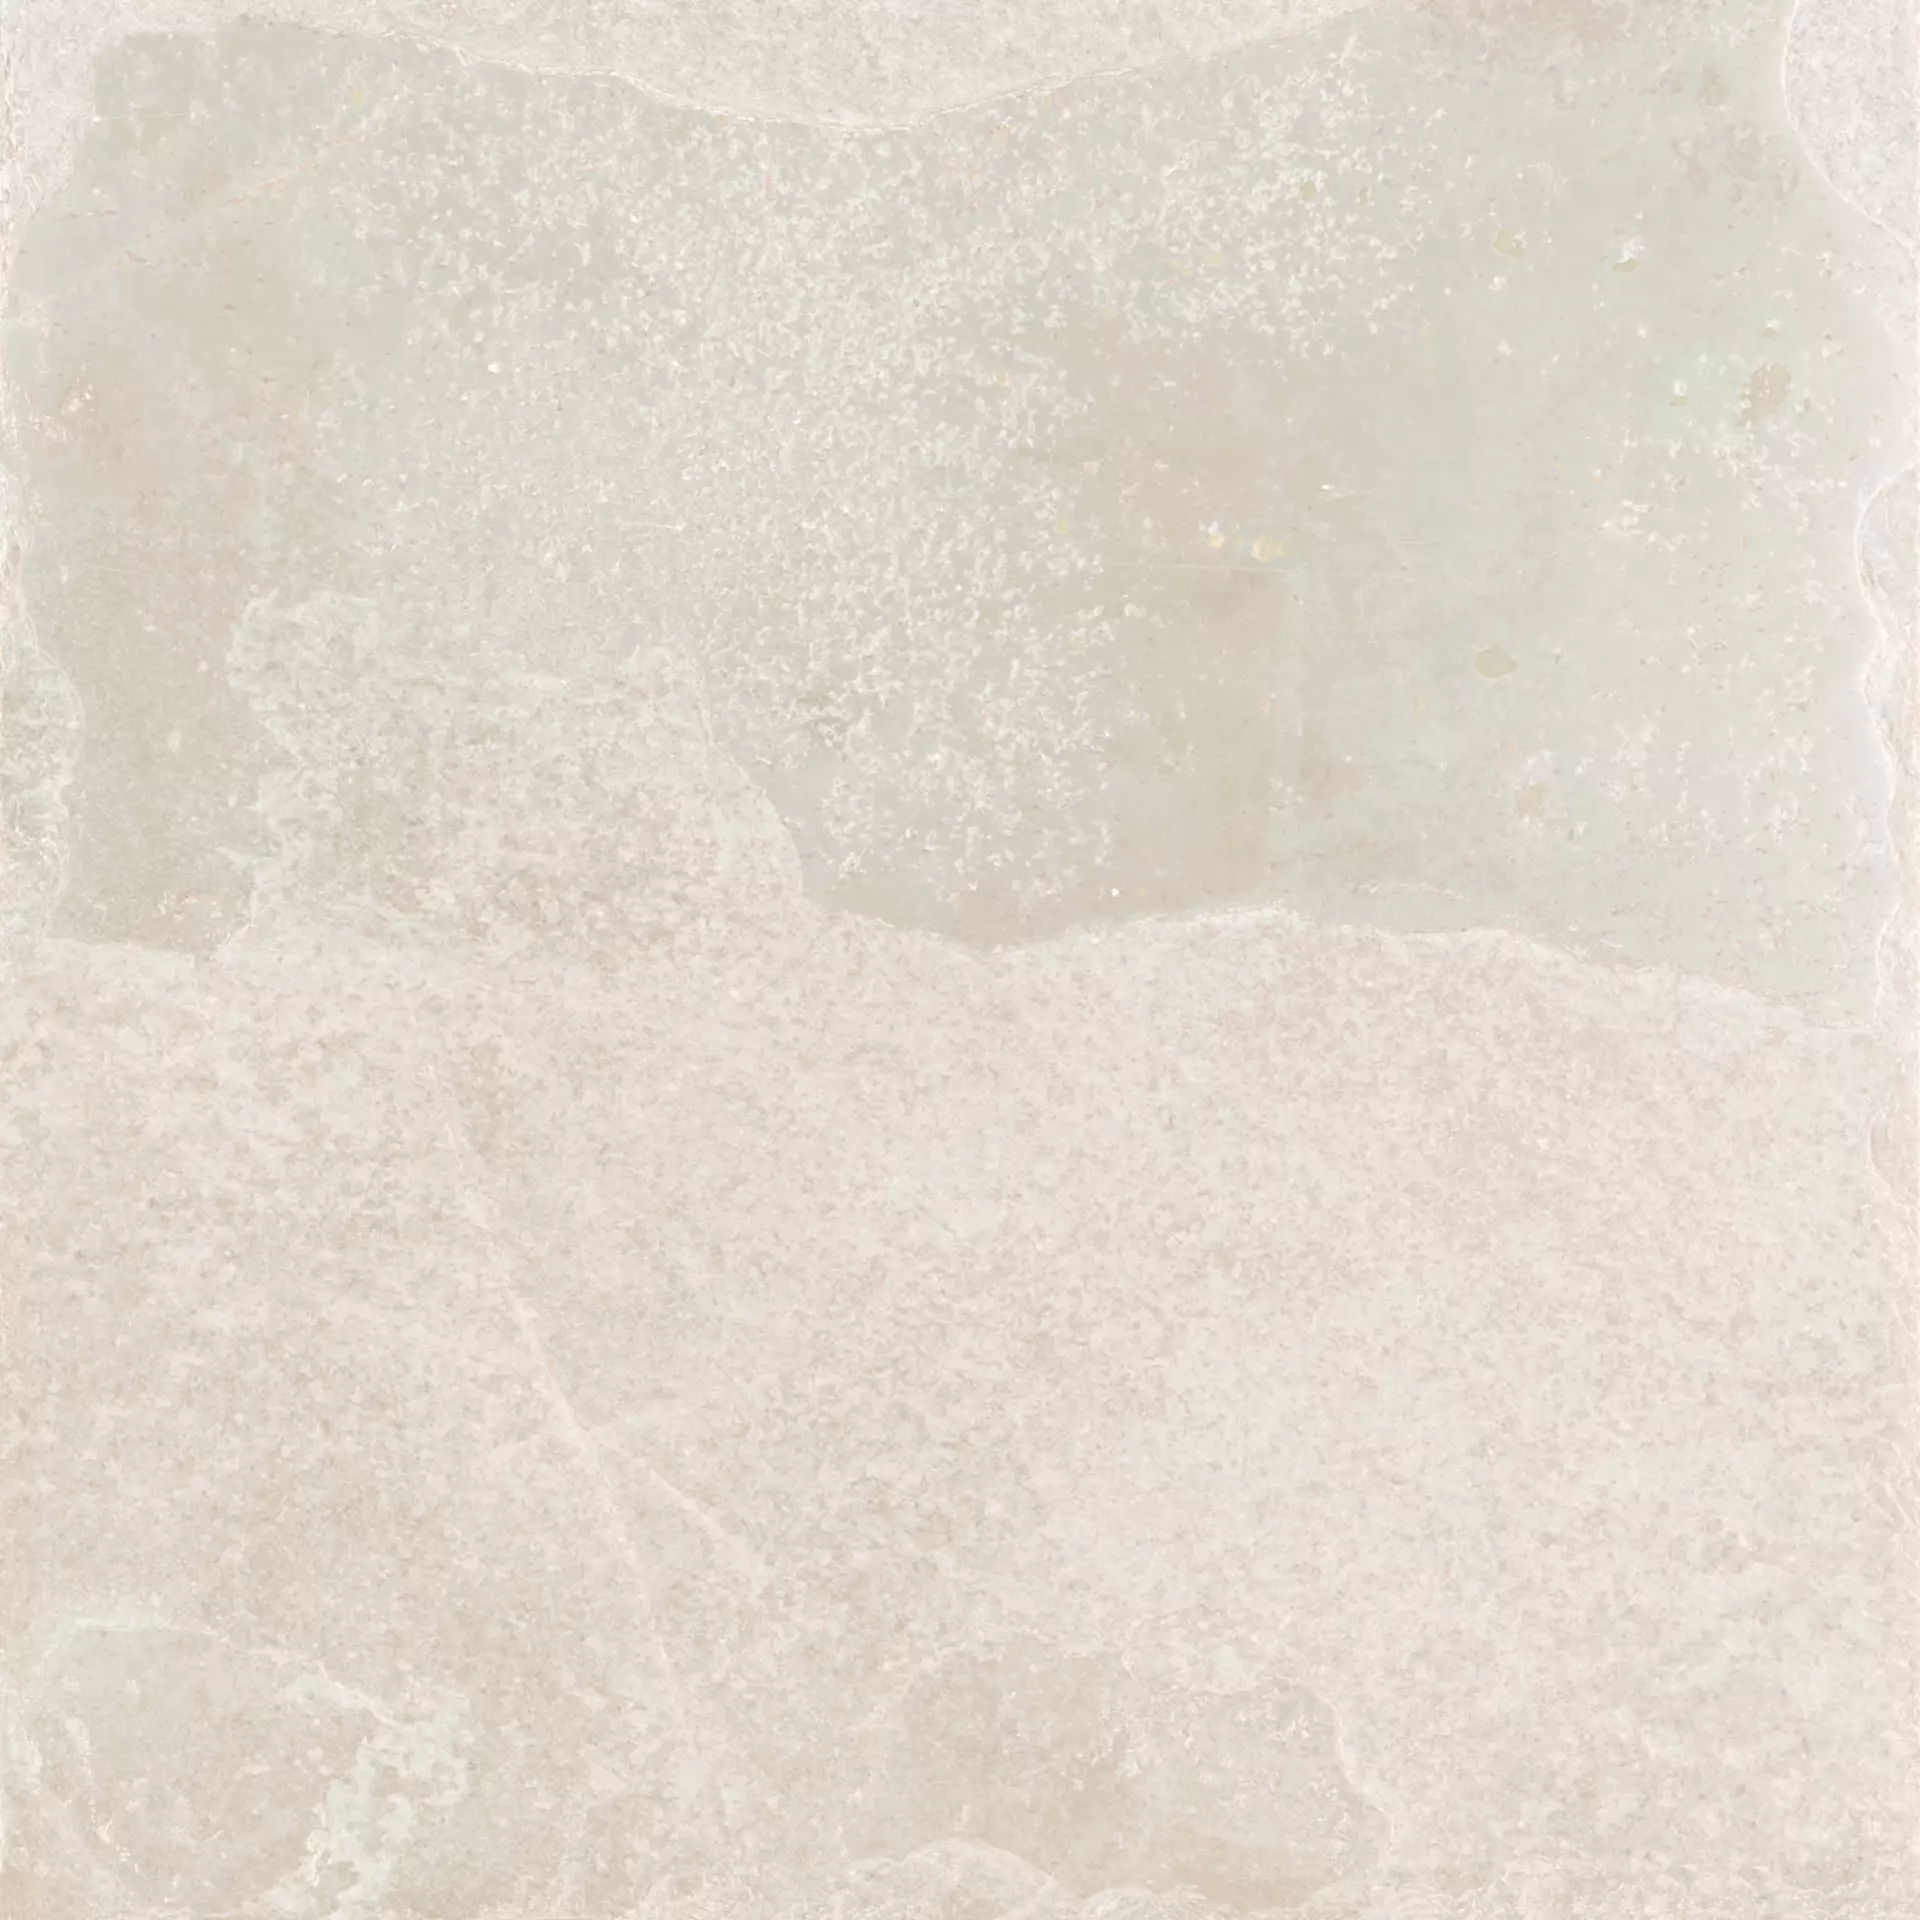 Provenza Groove Hot White Naturale E364 80x80cm rectified 9,5mm